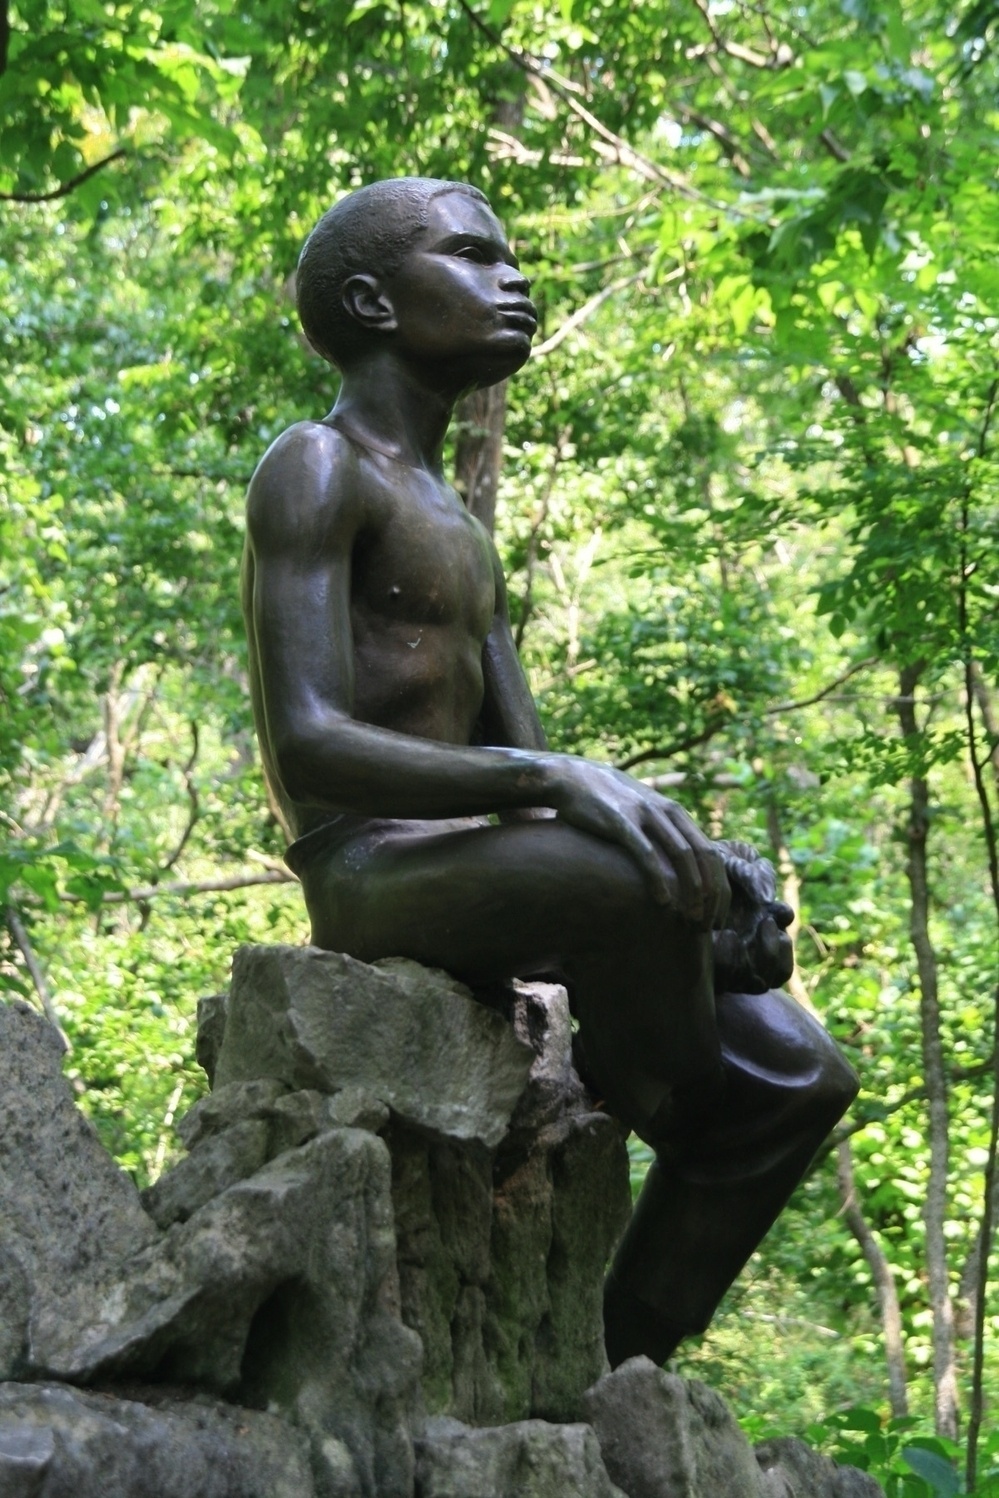 Statue of a young boy sitting on a rock